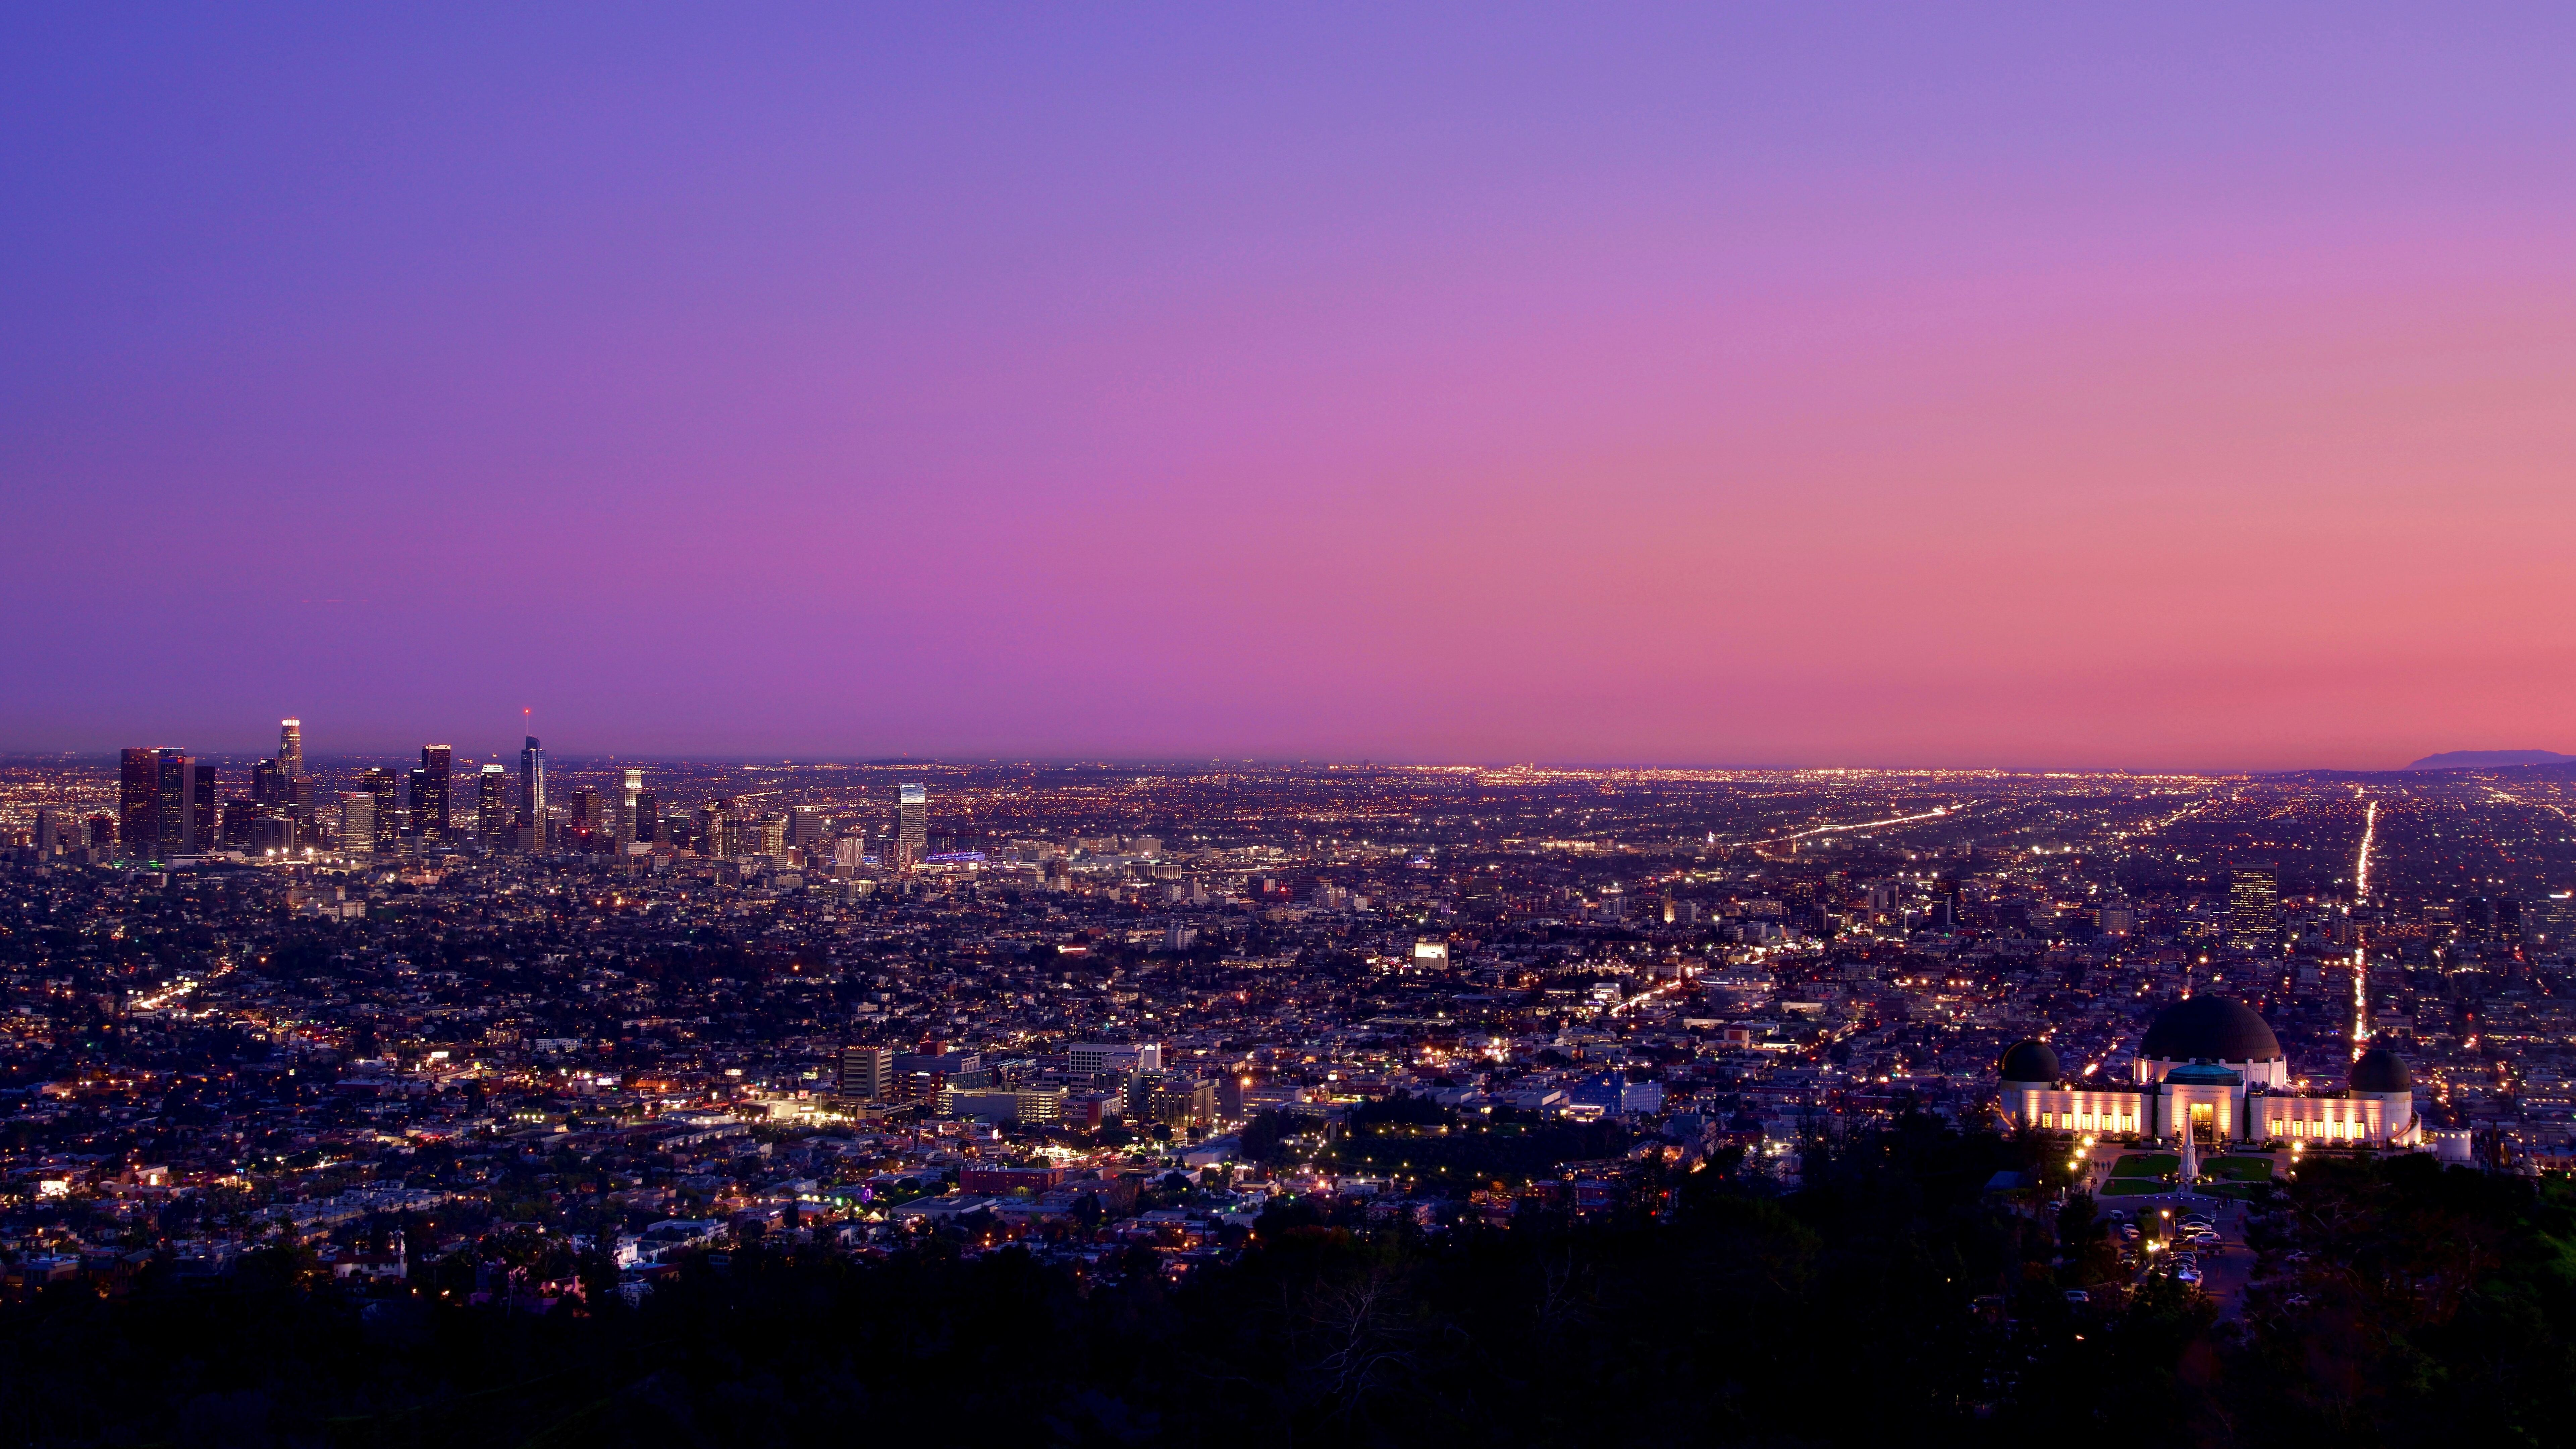 7680x4320 Los Angles City Sky 8k 8k HD 4k Wallpapers, Images, Backgrounds,  Photos and Pictures